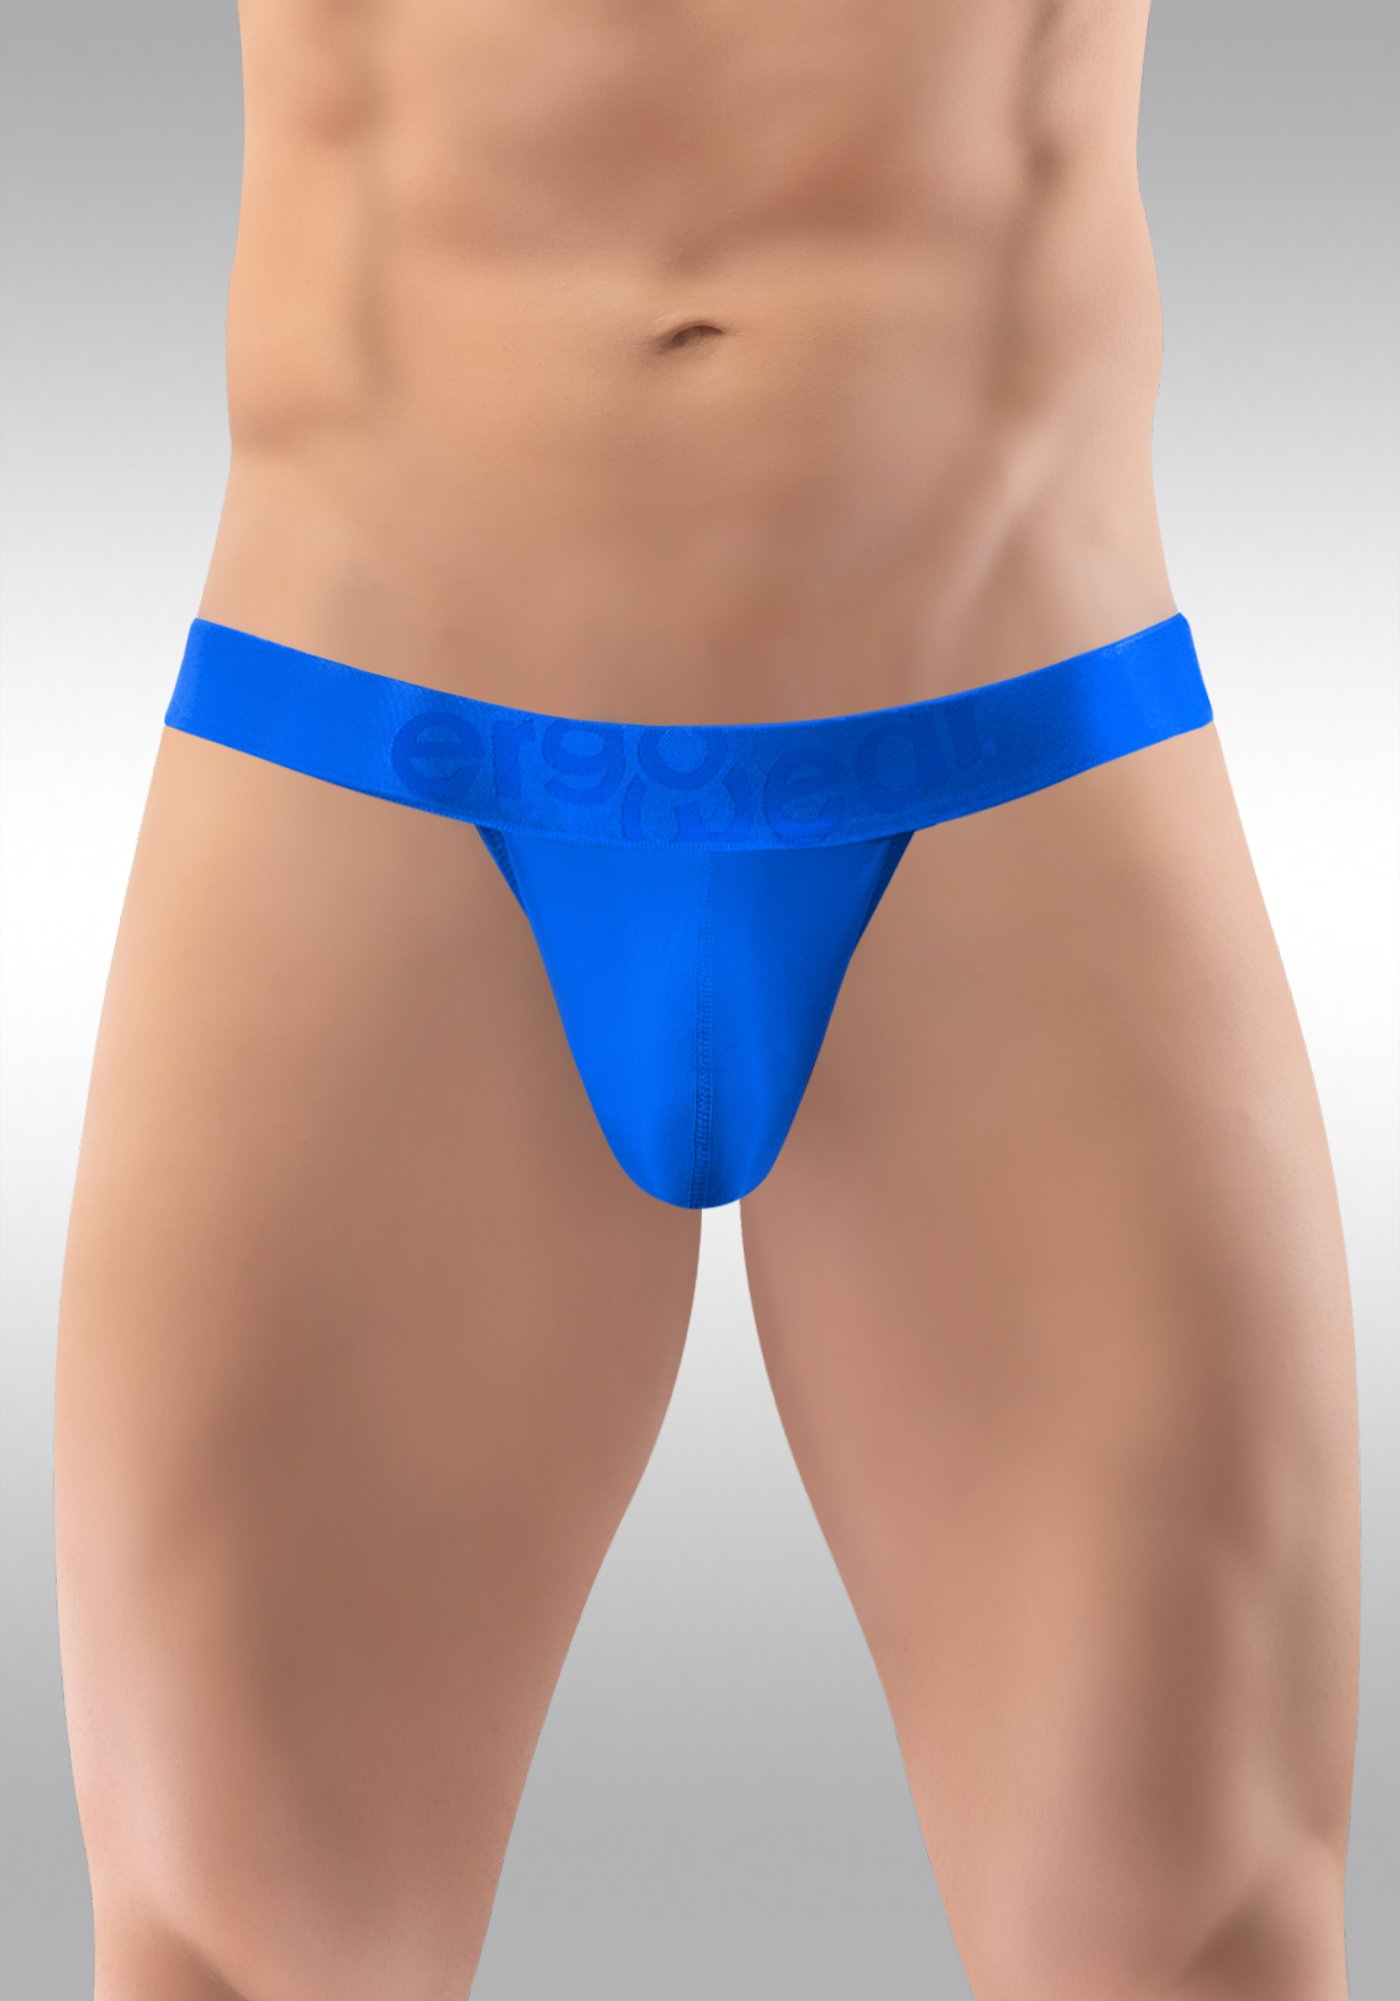 What's the Difference Between a Jockstrap Thong and G-String?